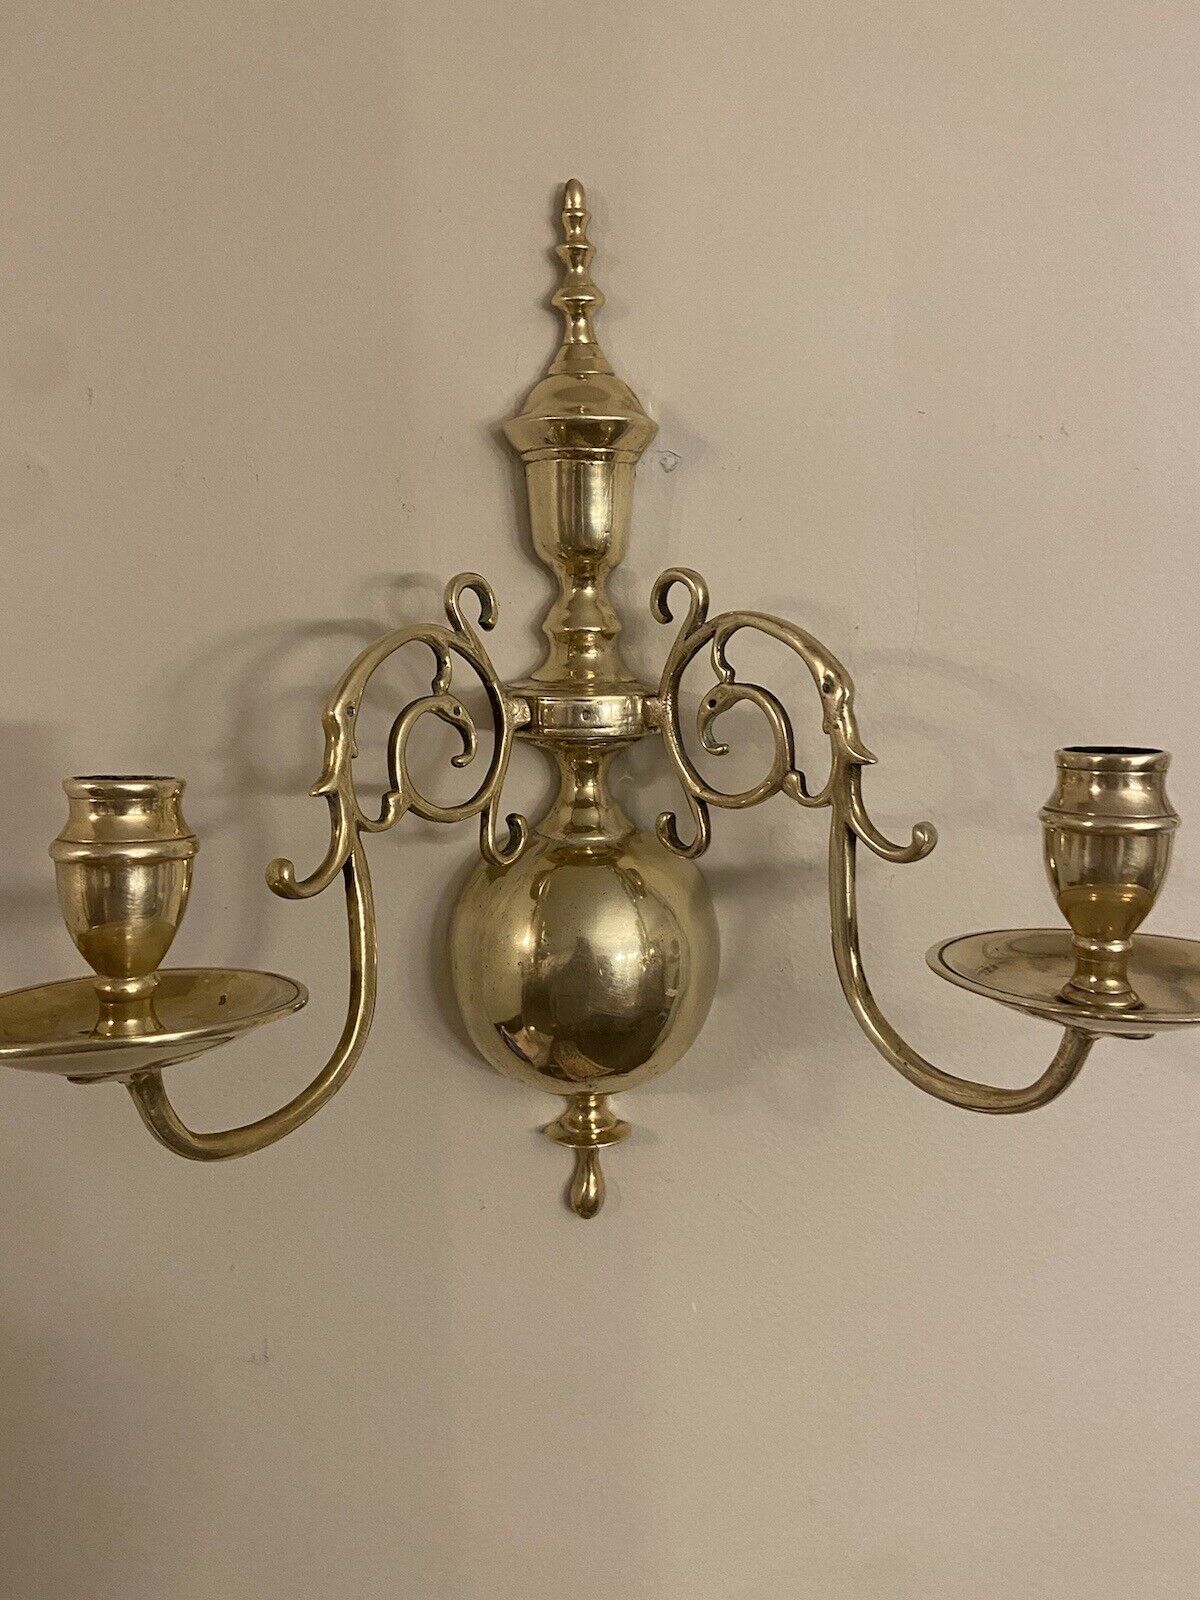 MCM 15”Ornate Double Candelabra Solid Brass Wall Mount Sconce Hollywood Regency